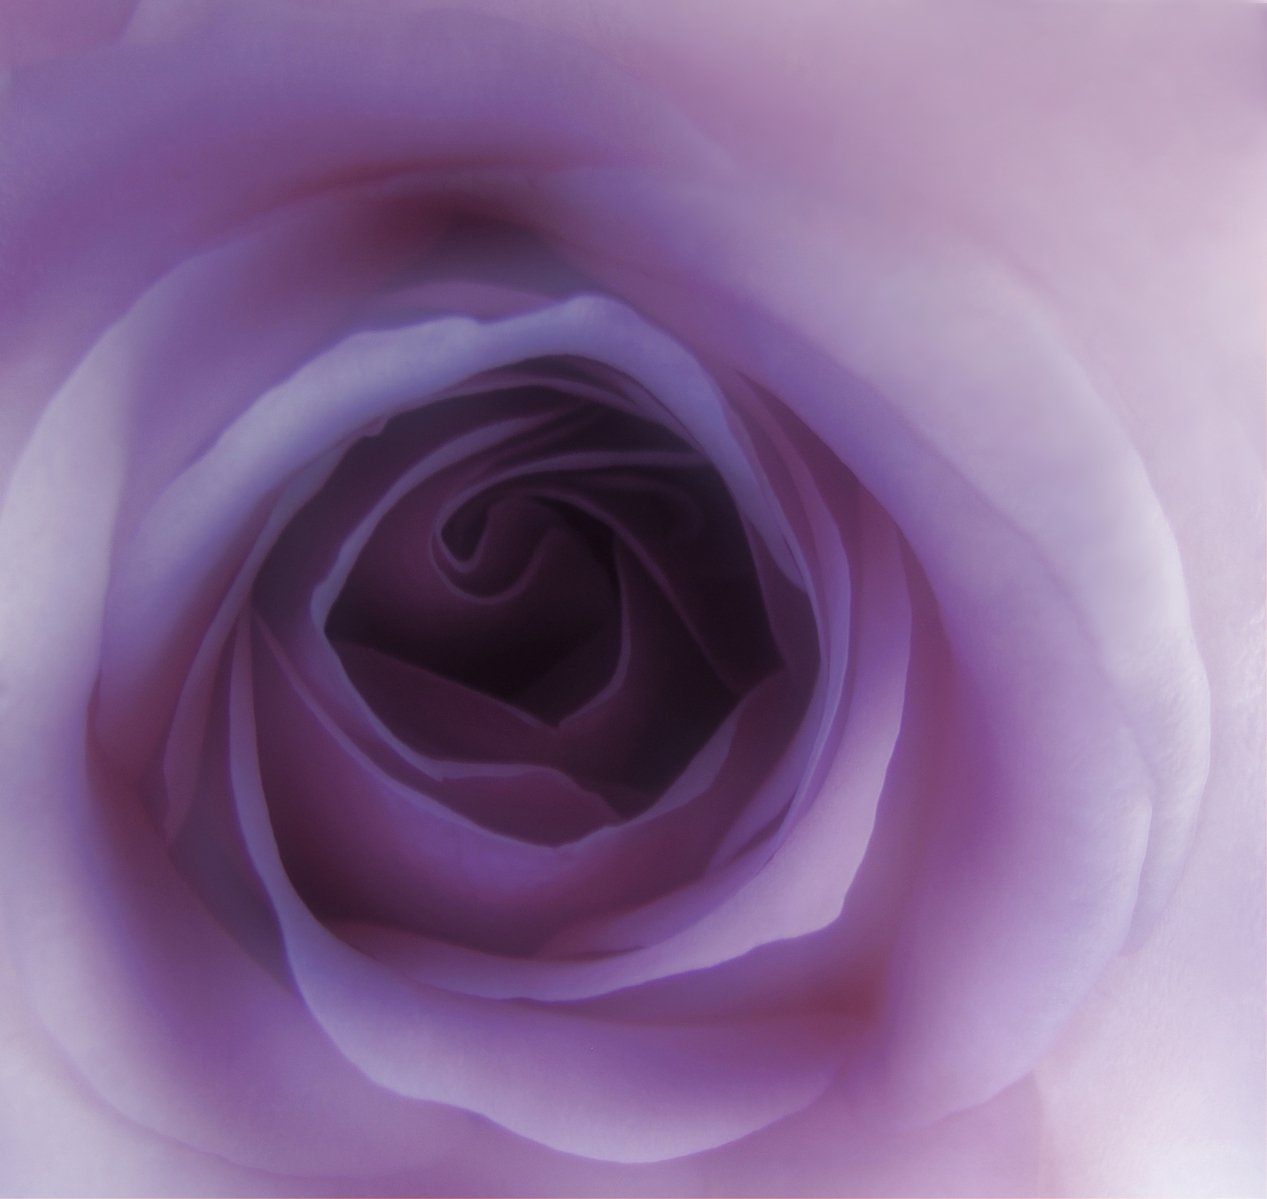 an abstract pink rose pograph taken from within